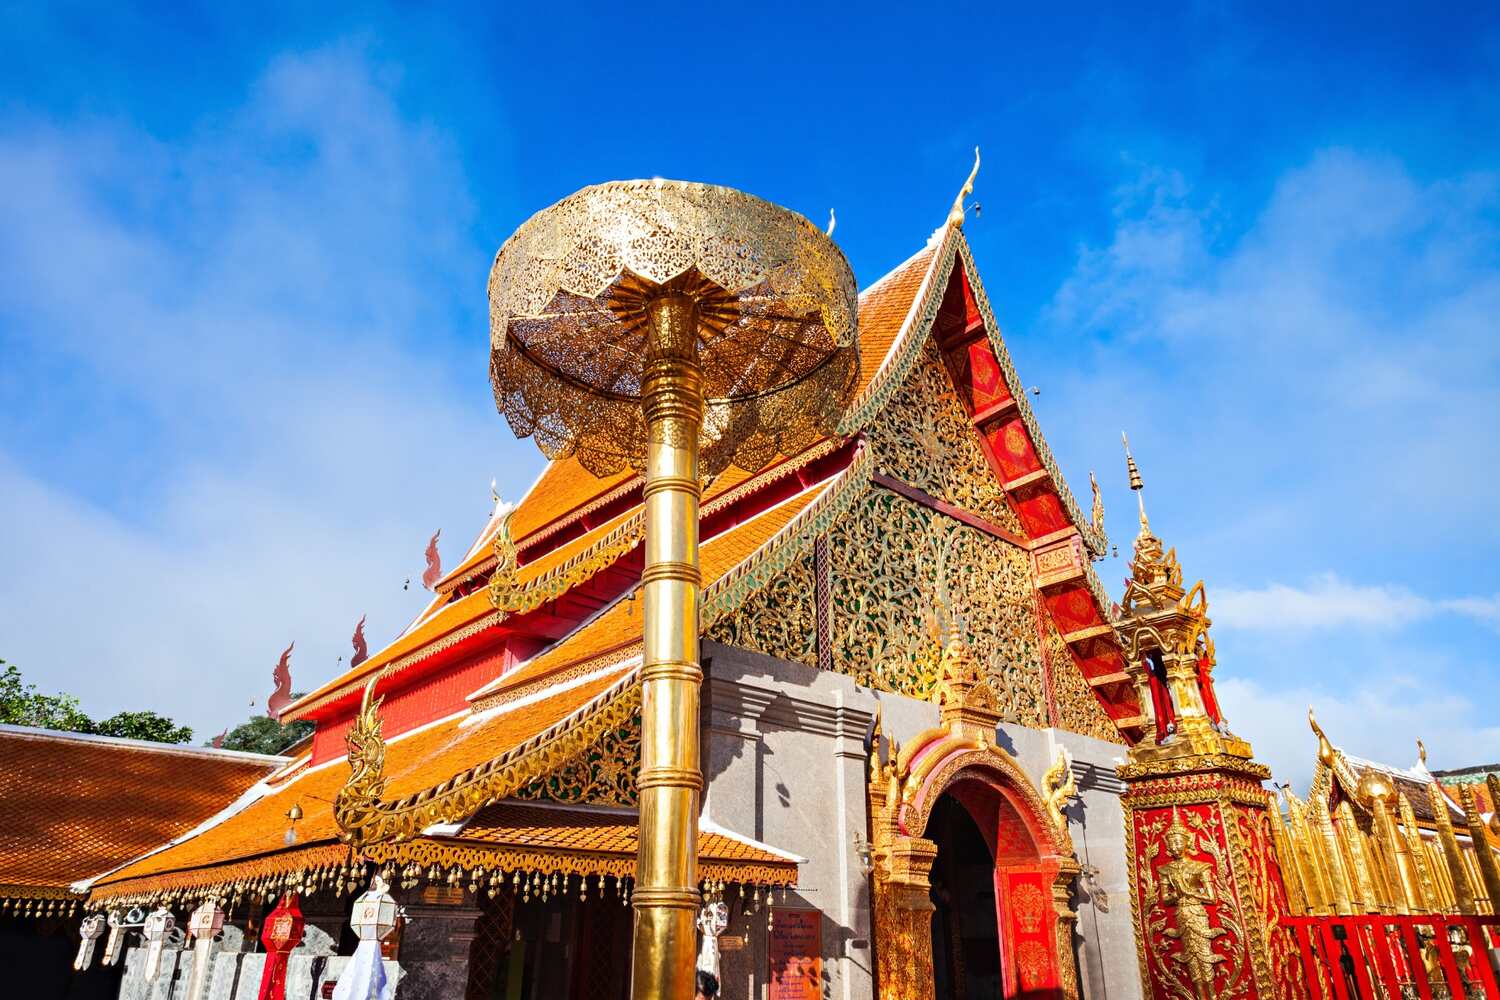 A golden spire of a temple with intricate red and blue decorations against a blue sky with fluffy clouds - How to get to Doi Suthep from Chiang Mai old town